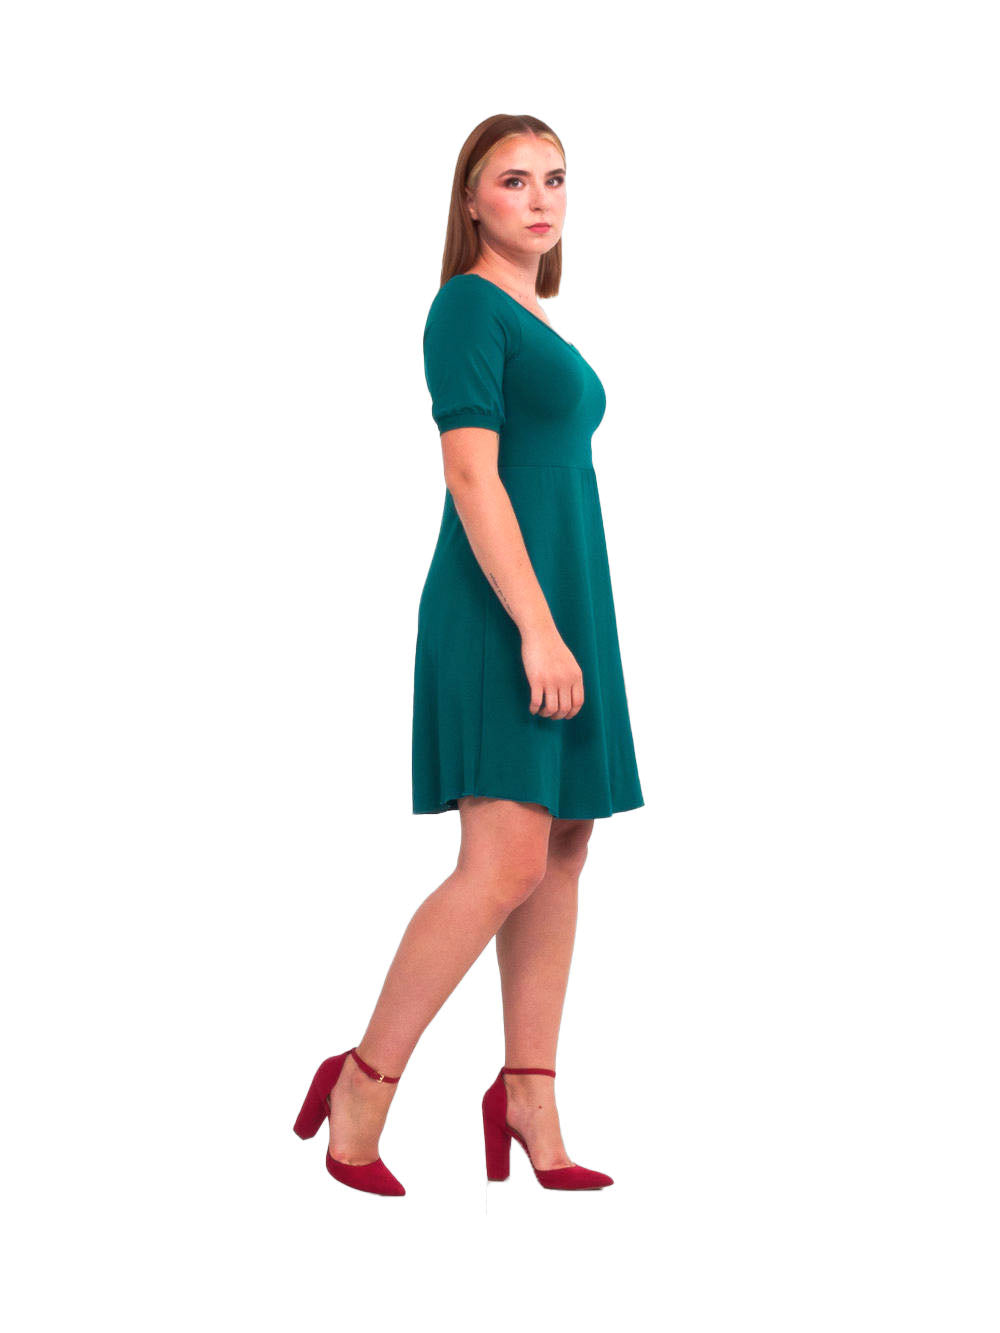 Petillante Dress by Slak, Turquoise, side view, round neck, short slightly puffed sleeve with bands at the cuffs, fit and flare shape, circular skirt is shorter at the side seams, eco-fabric, bamboo, sizes XS to XXL, made in Montreal 